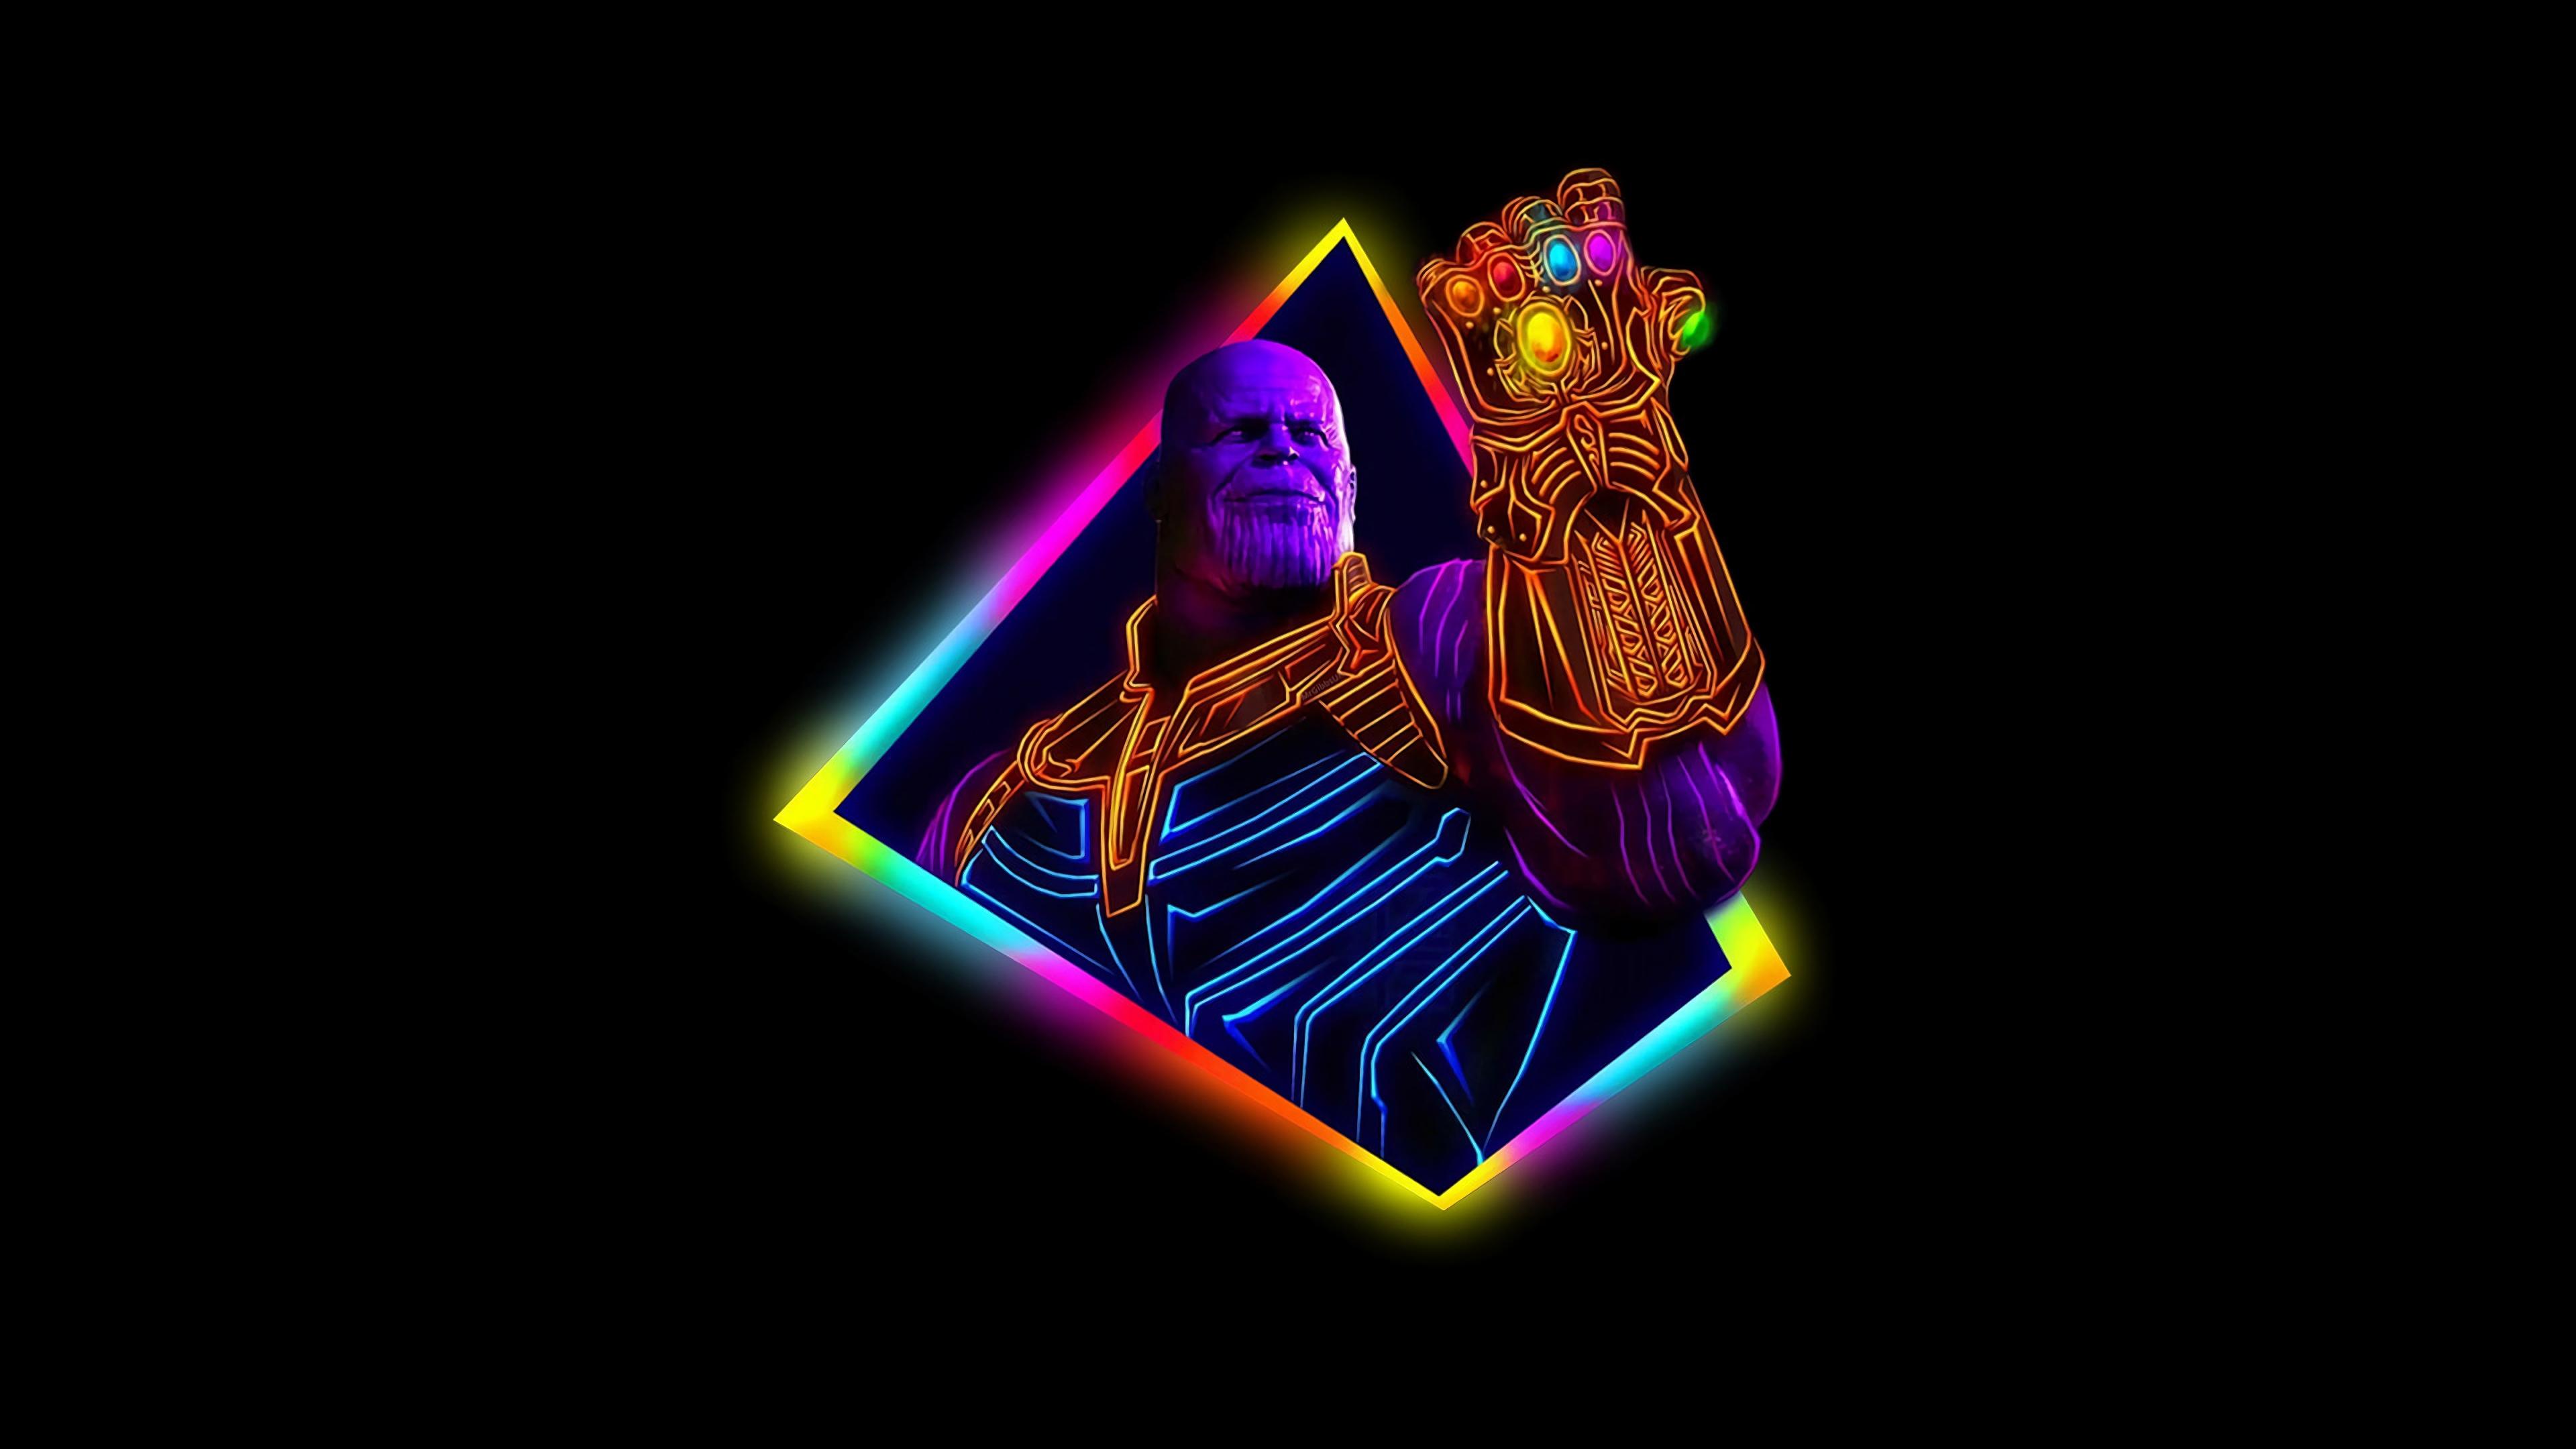 Download 'The powerful Infinity Stones' Wallpaper | Wallpapers.com